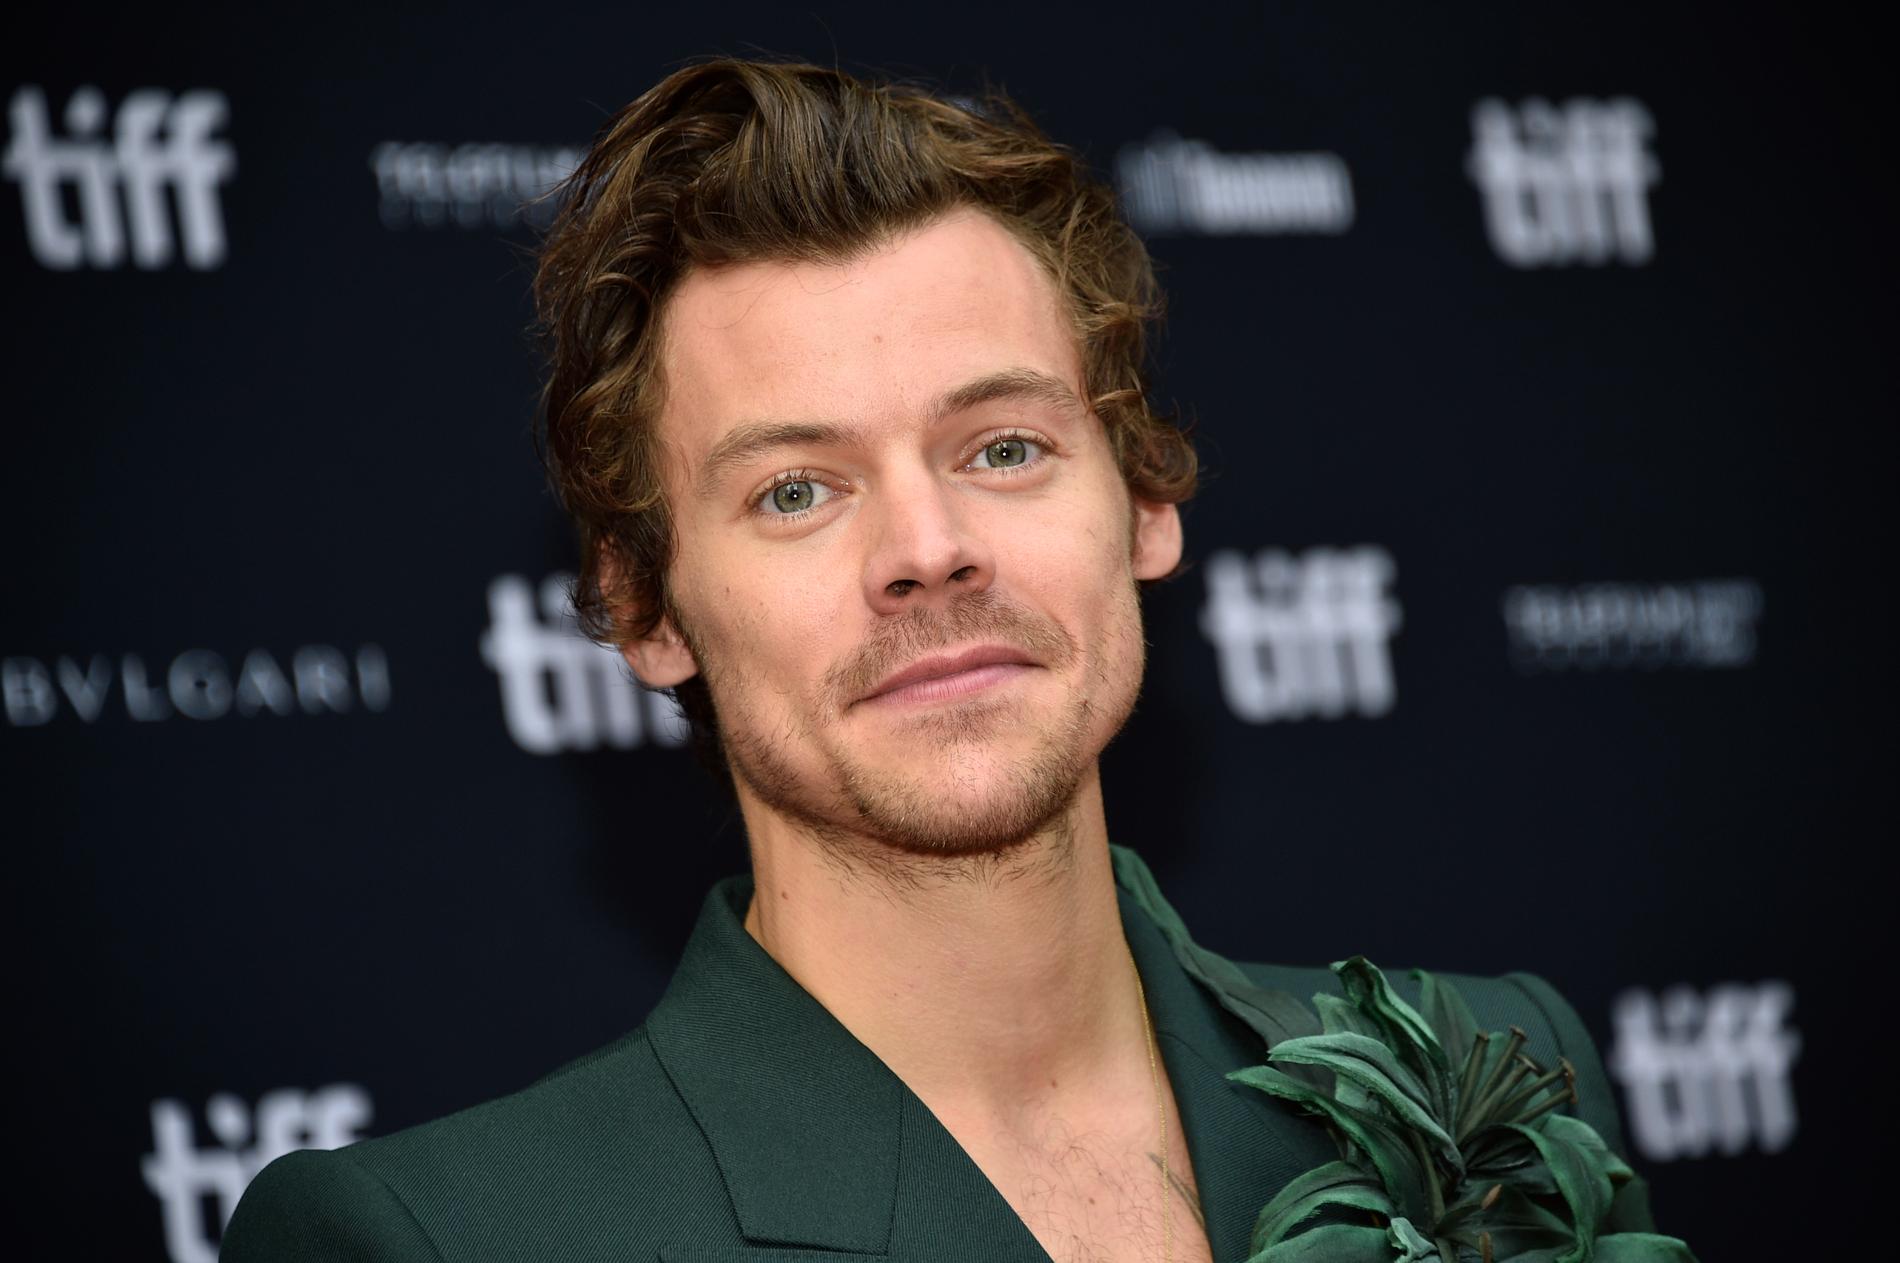 Harry Styles sets a US record with "As It Was" - VG